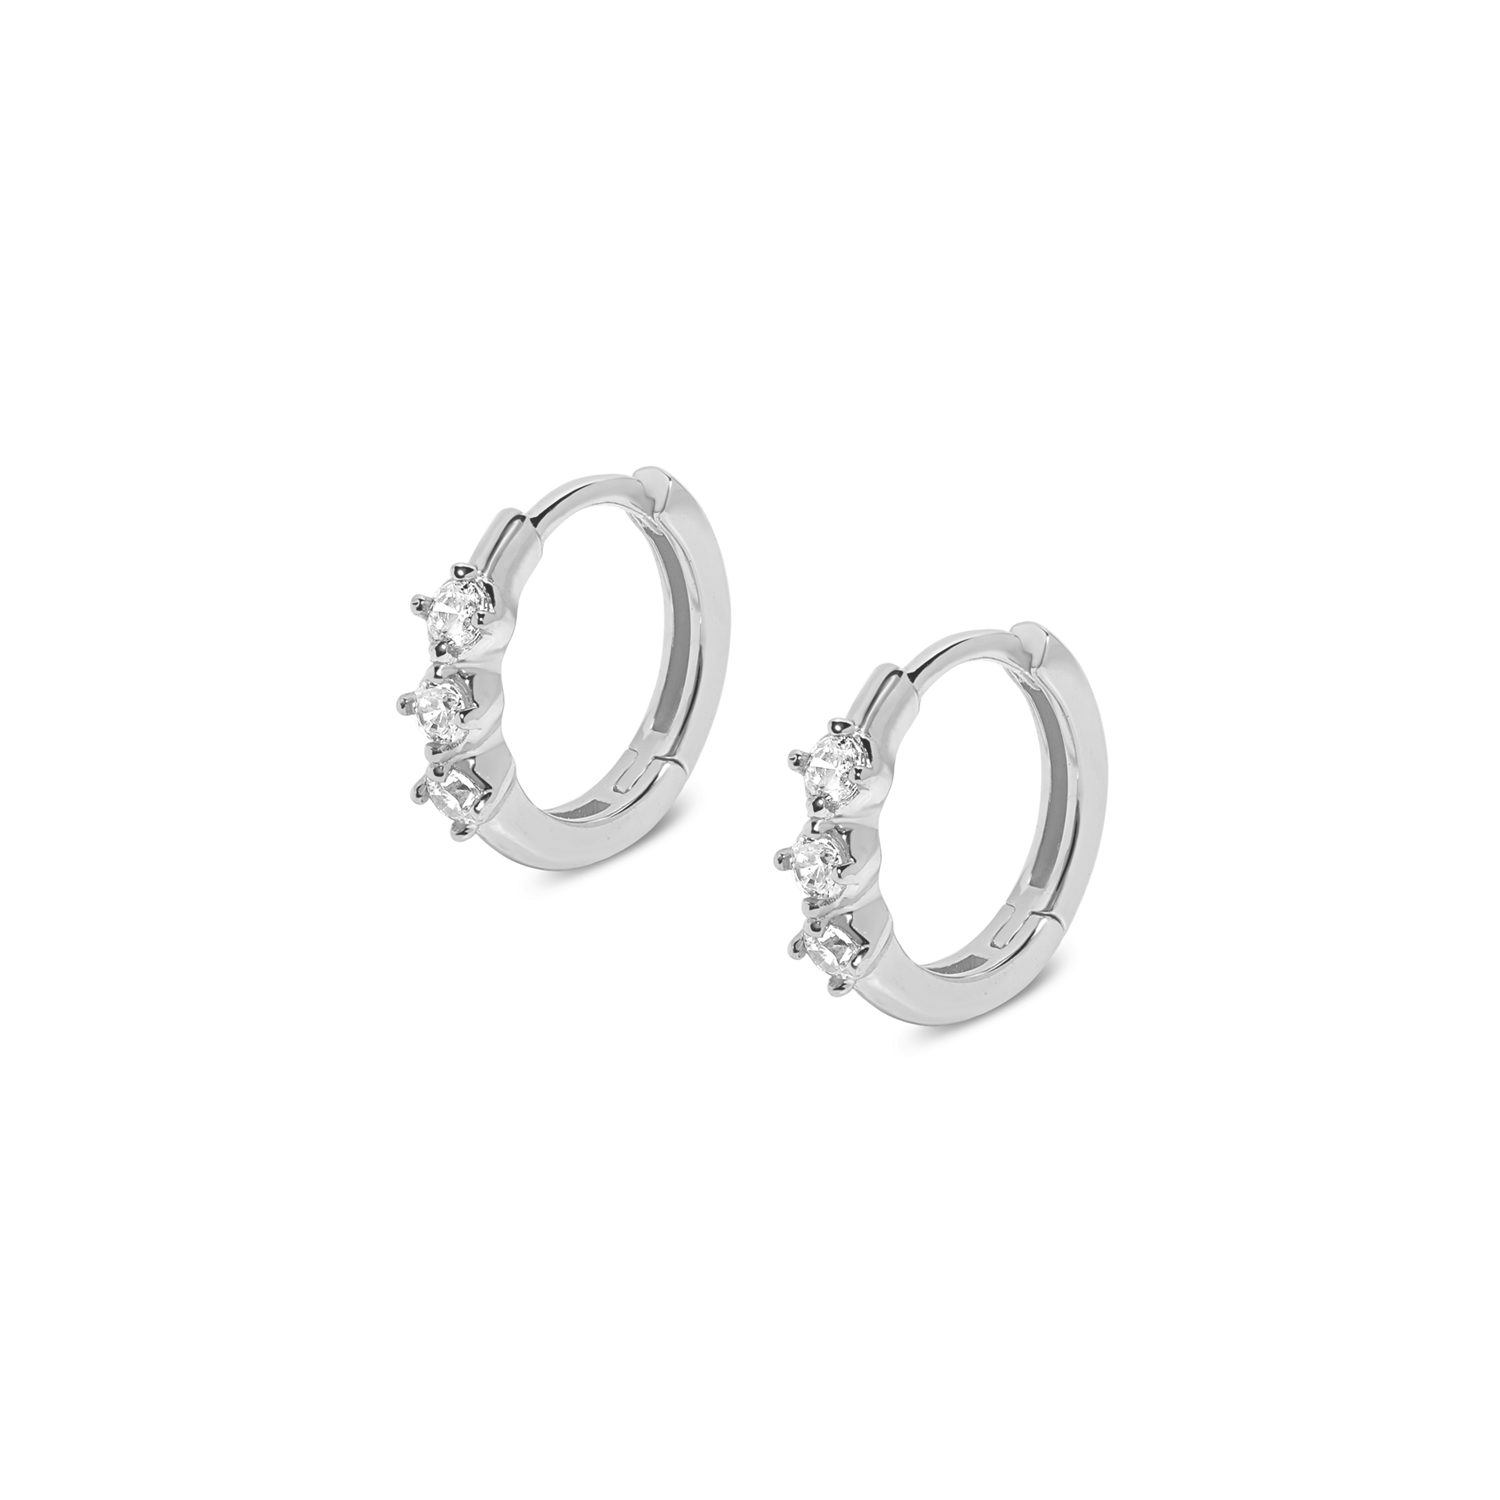 Luxurious and elegant earrings. 925 silver huggies with cubic zirconia